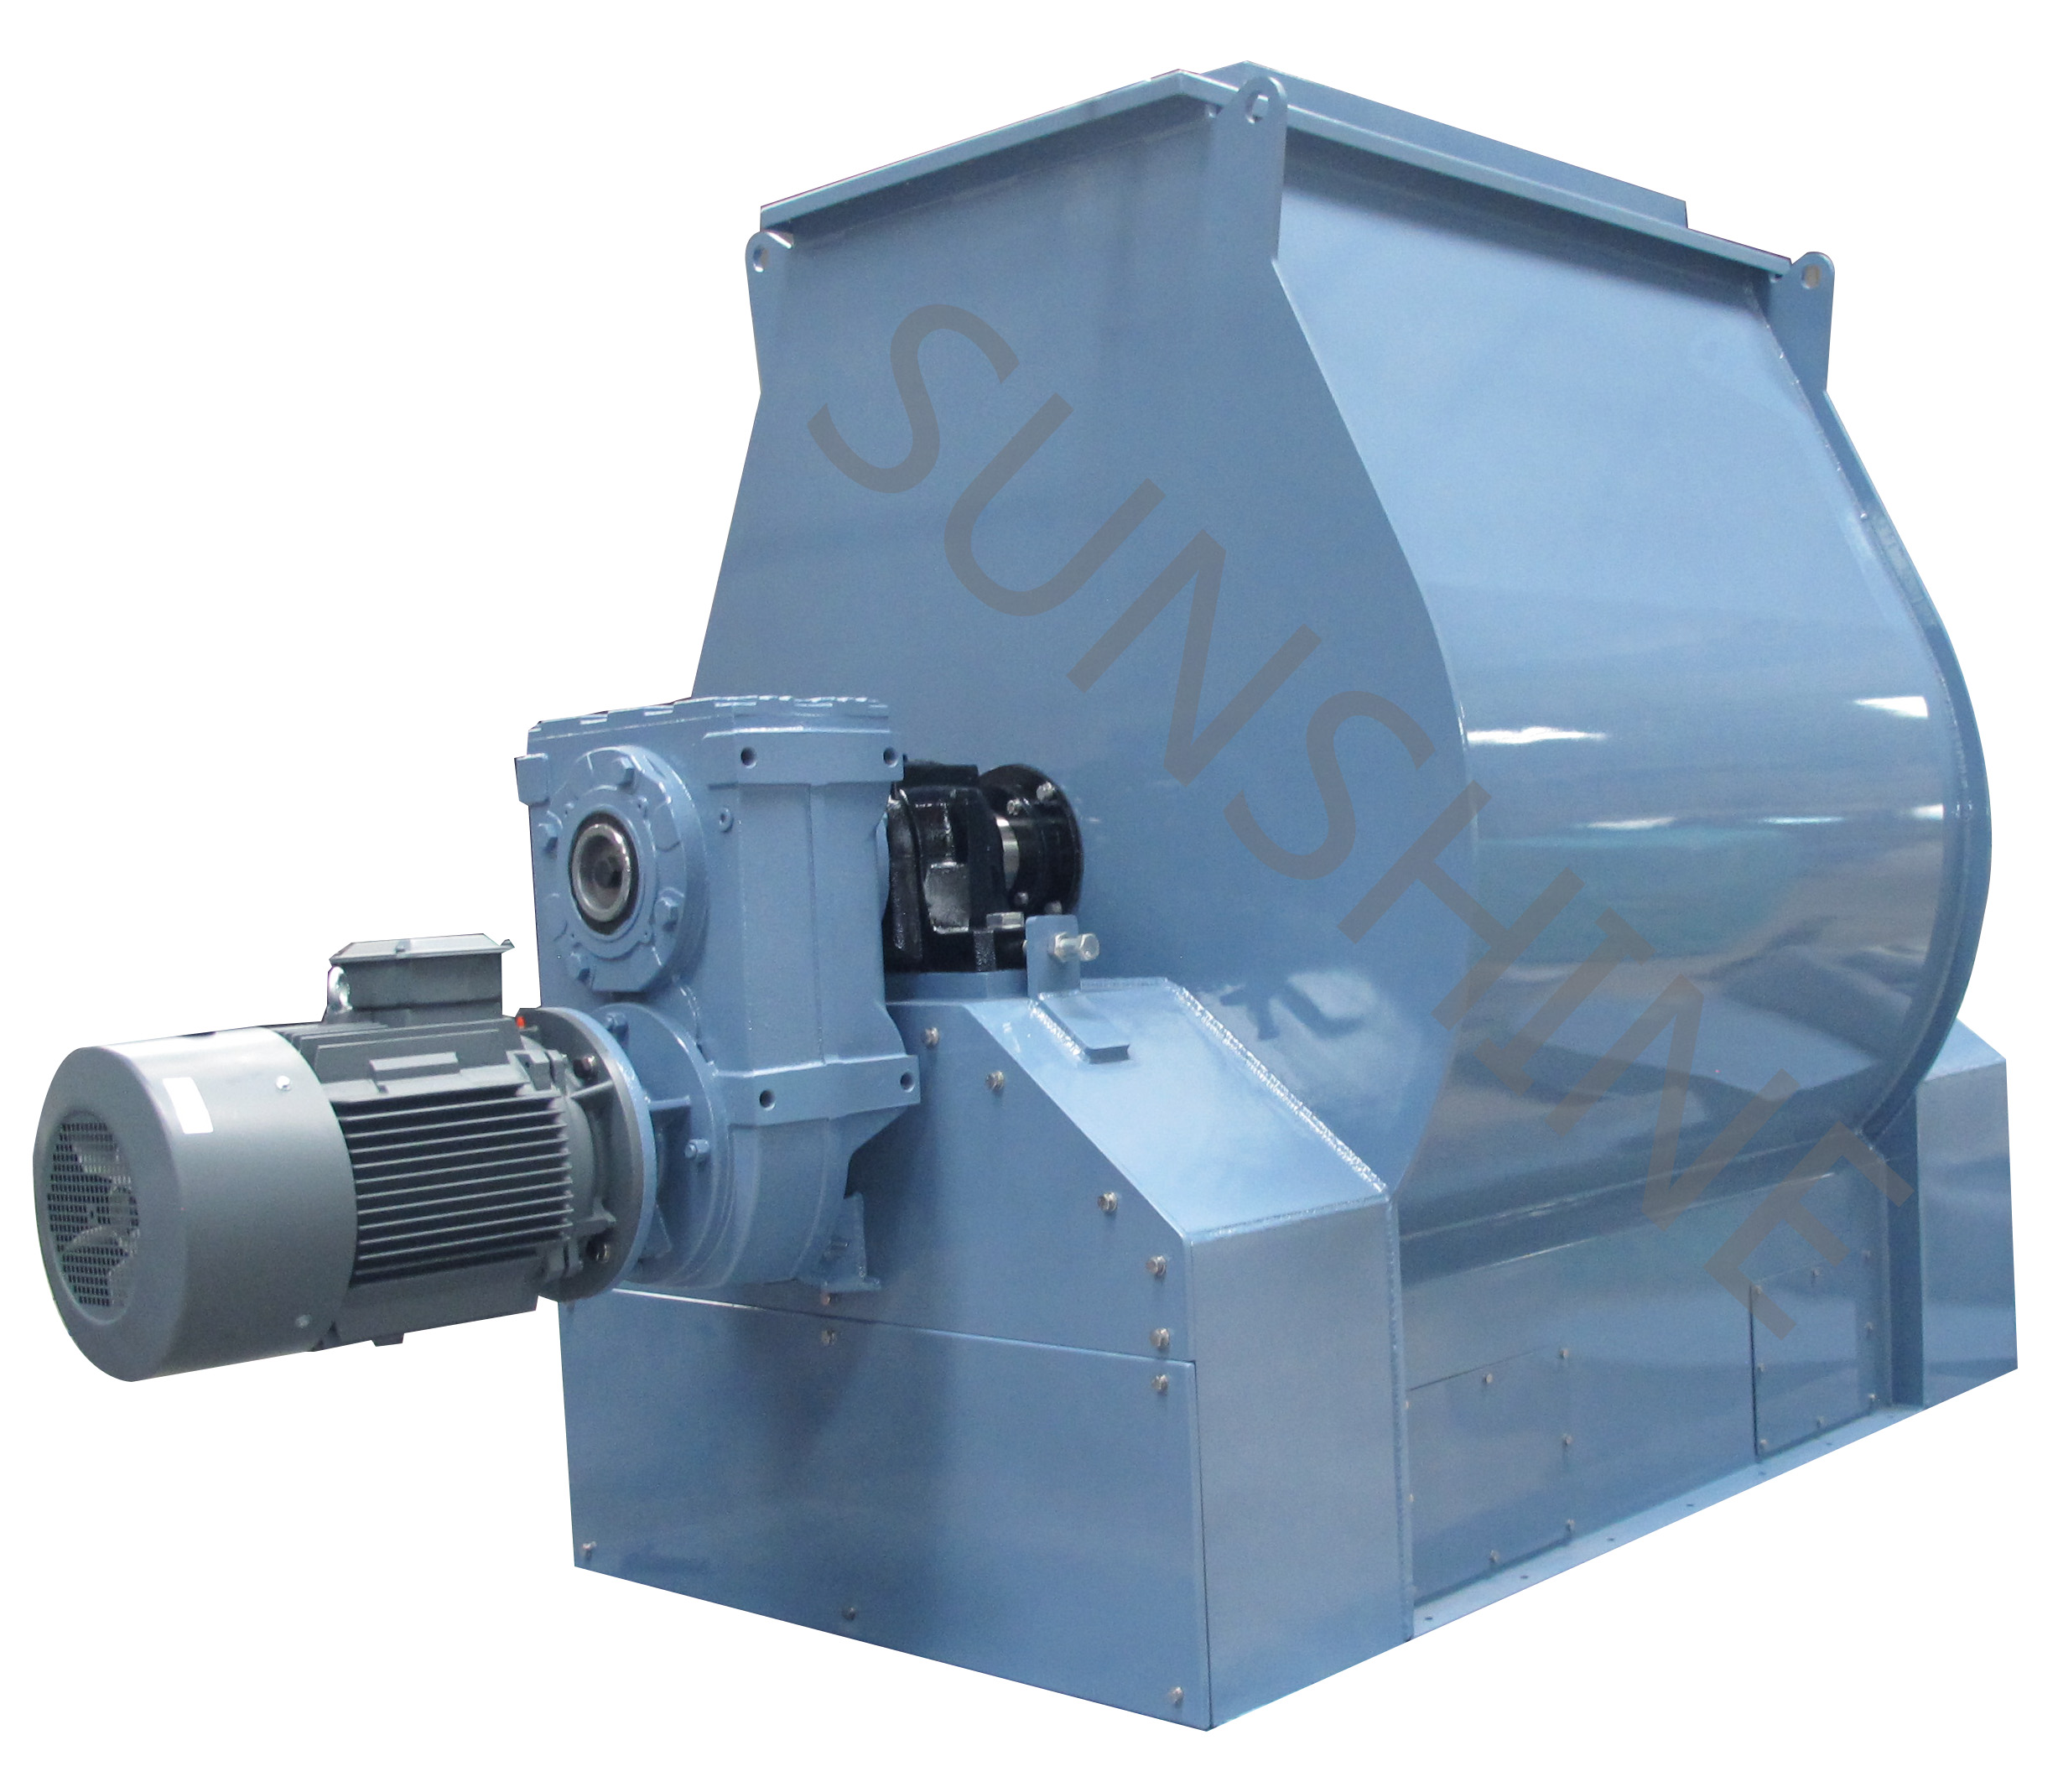 Sunshine hot sell Poultry Feed Pellet Making Machine 